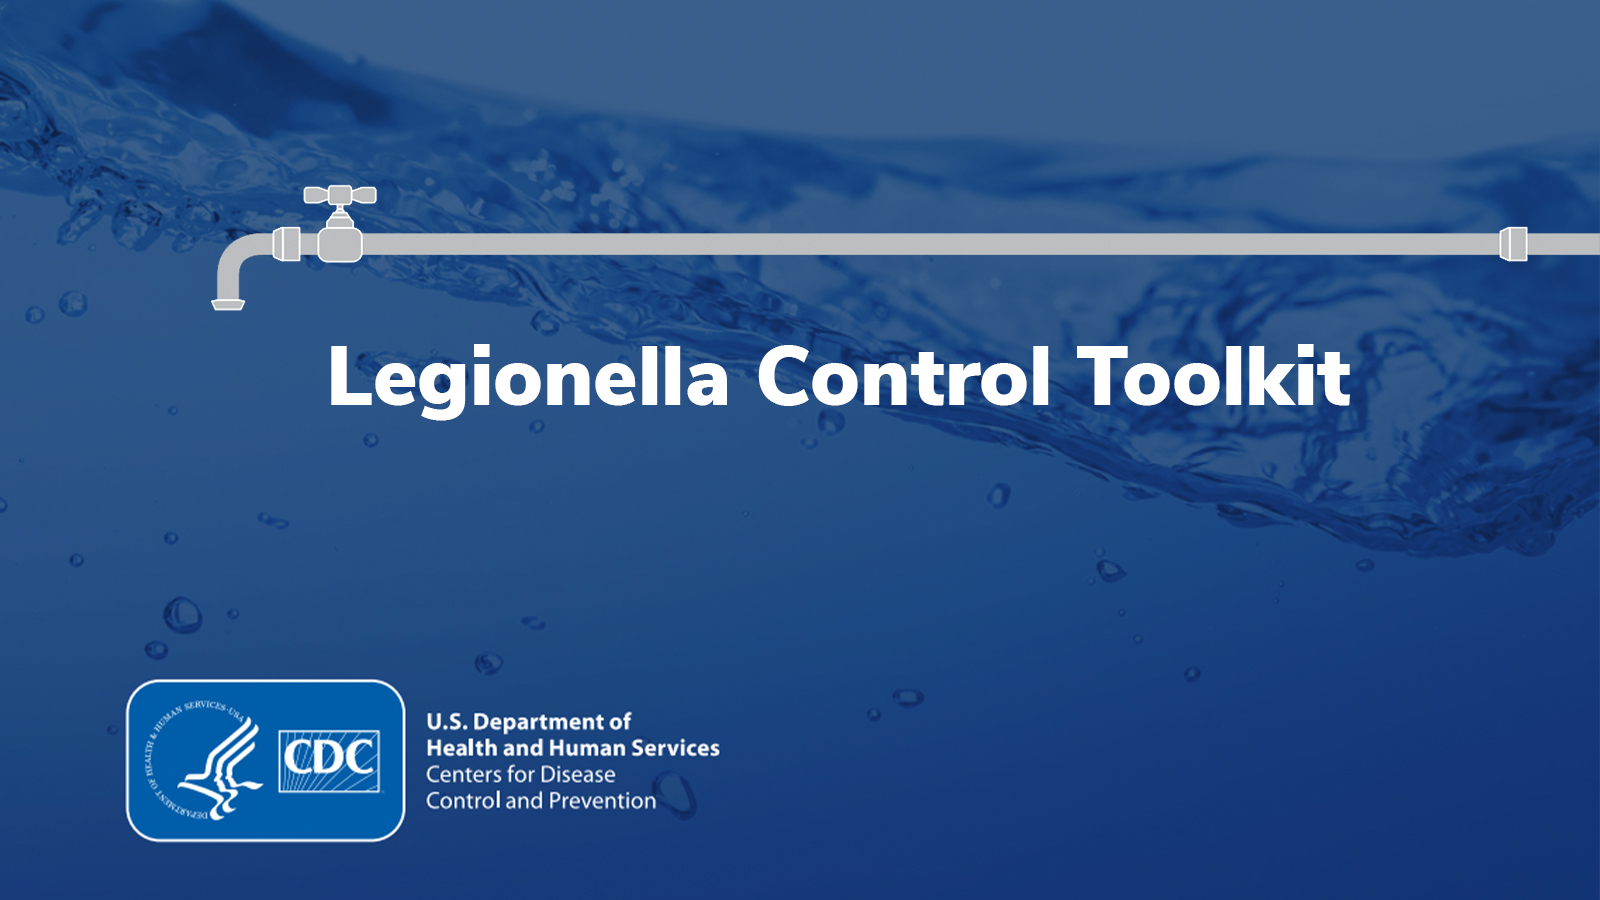 Changes & Updates to the CDC Toolkit for Legionella Control